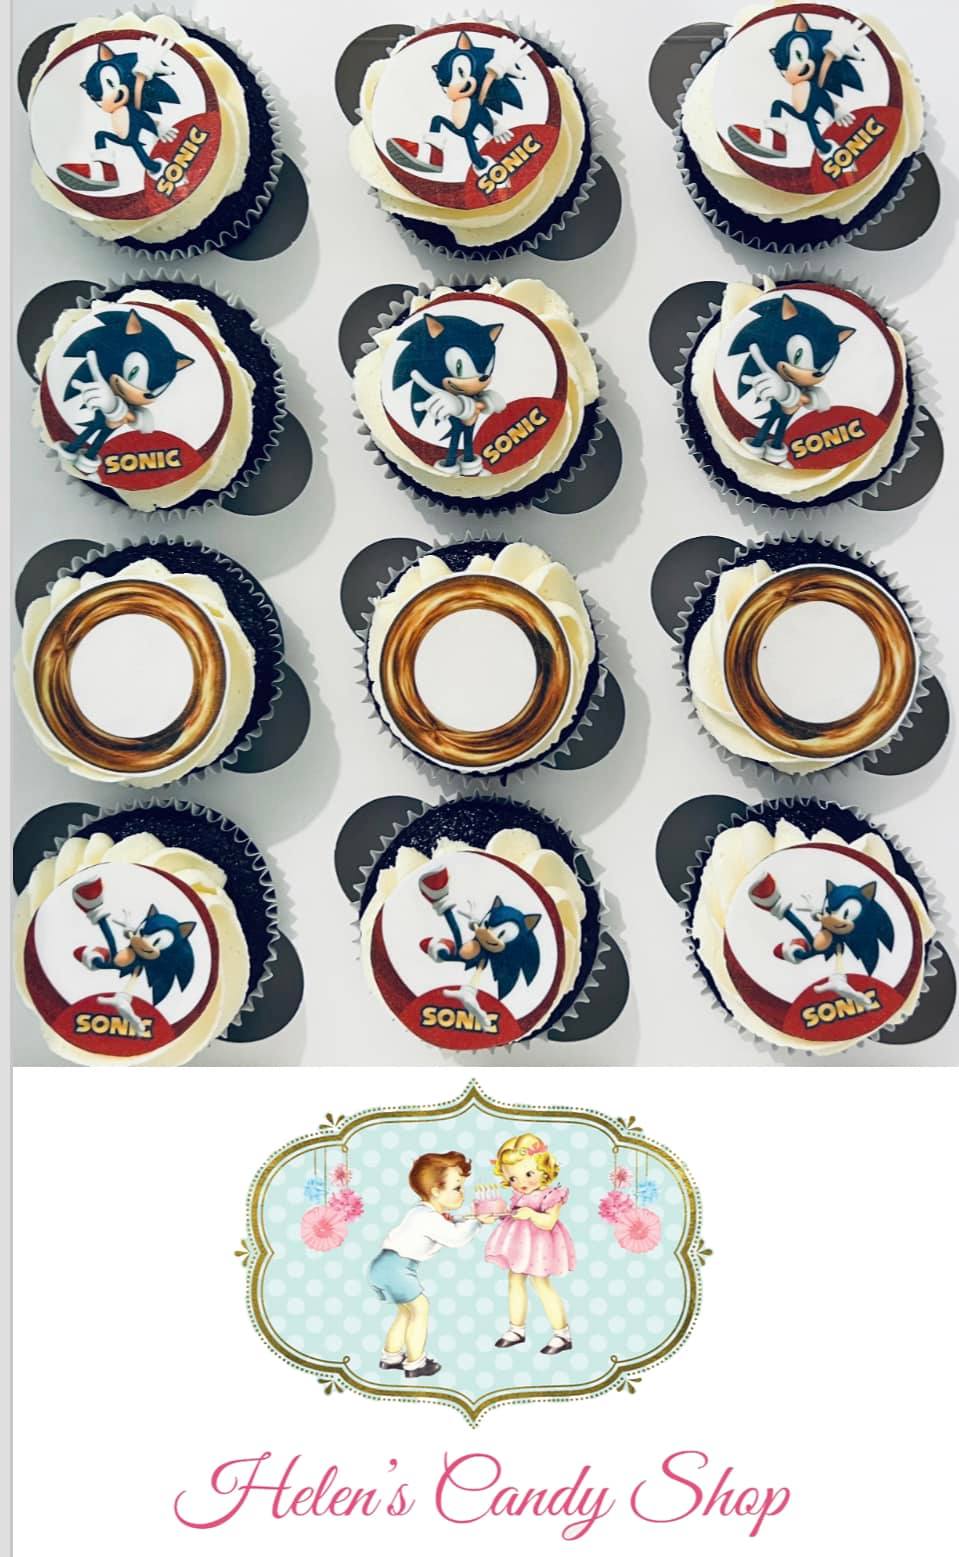 Customised Cupcakes with Edible Images